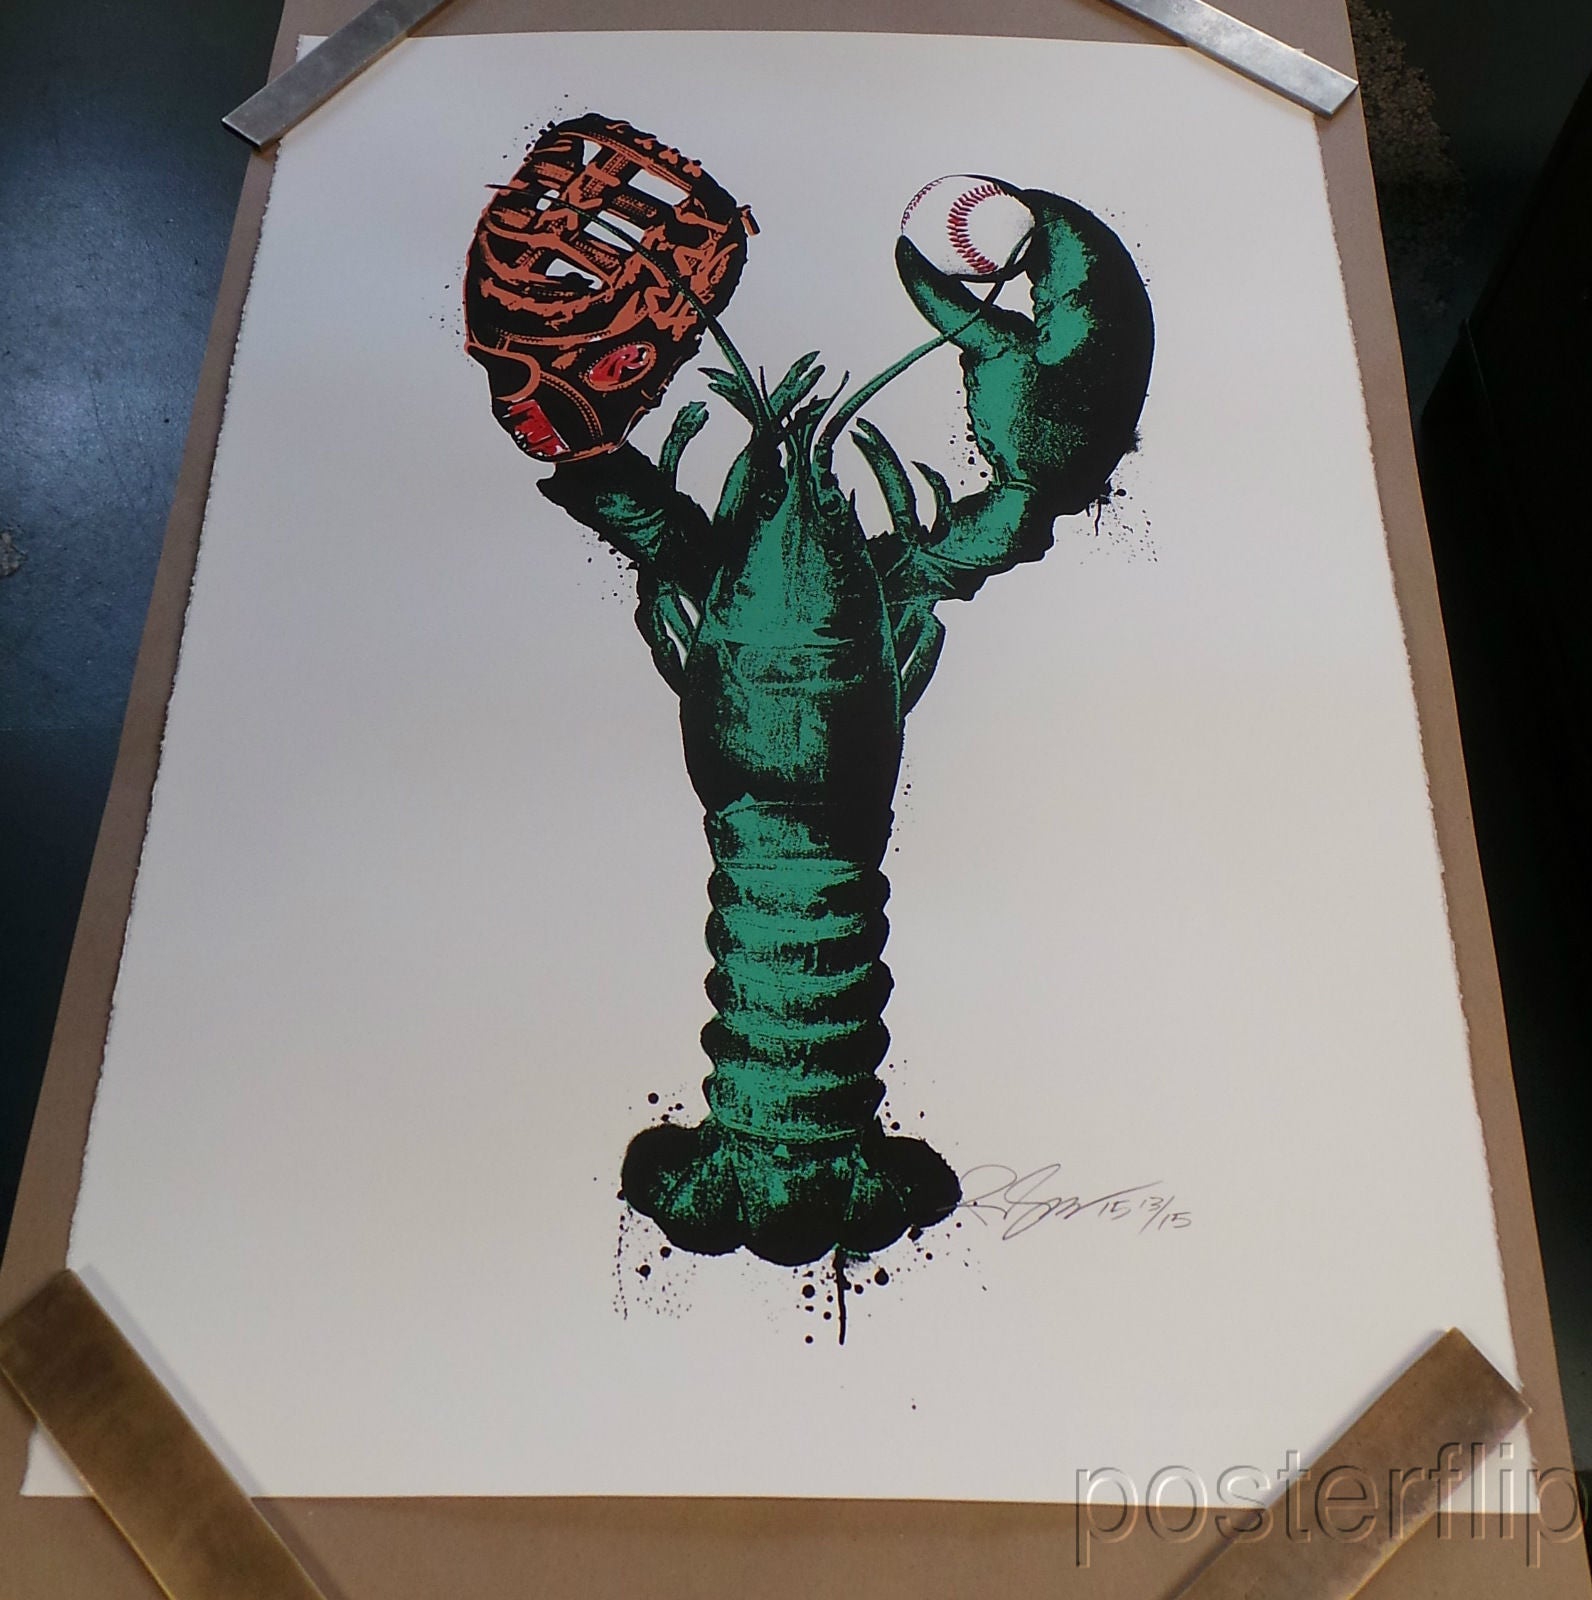 Title: Green Monsta  Artist: Rene Gagnon  Edition: Released by Rene Gagnon Fine Art in 2015 in a limited edition of 15 prints, signed and numbered by the artist.  Type: Screen printed poster, Printed on hand-deckled paper  Size: 30" x 22"  Notes:  Print is stored flat in very good condition. Following purchase, prints are rolled in archival paper and shipped with bubble wrap in sturdy cardboard tubes.  Check out our other listings for more hard-to-find and out-of-print posters.